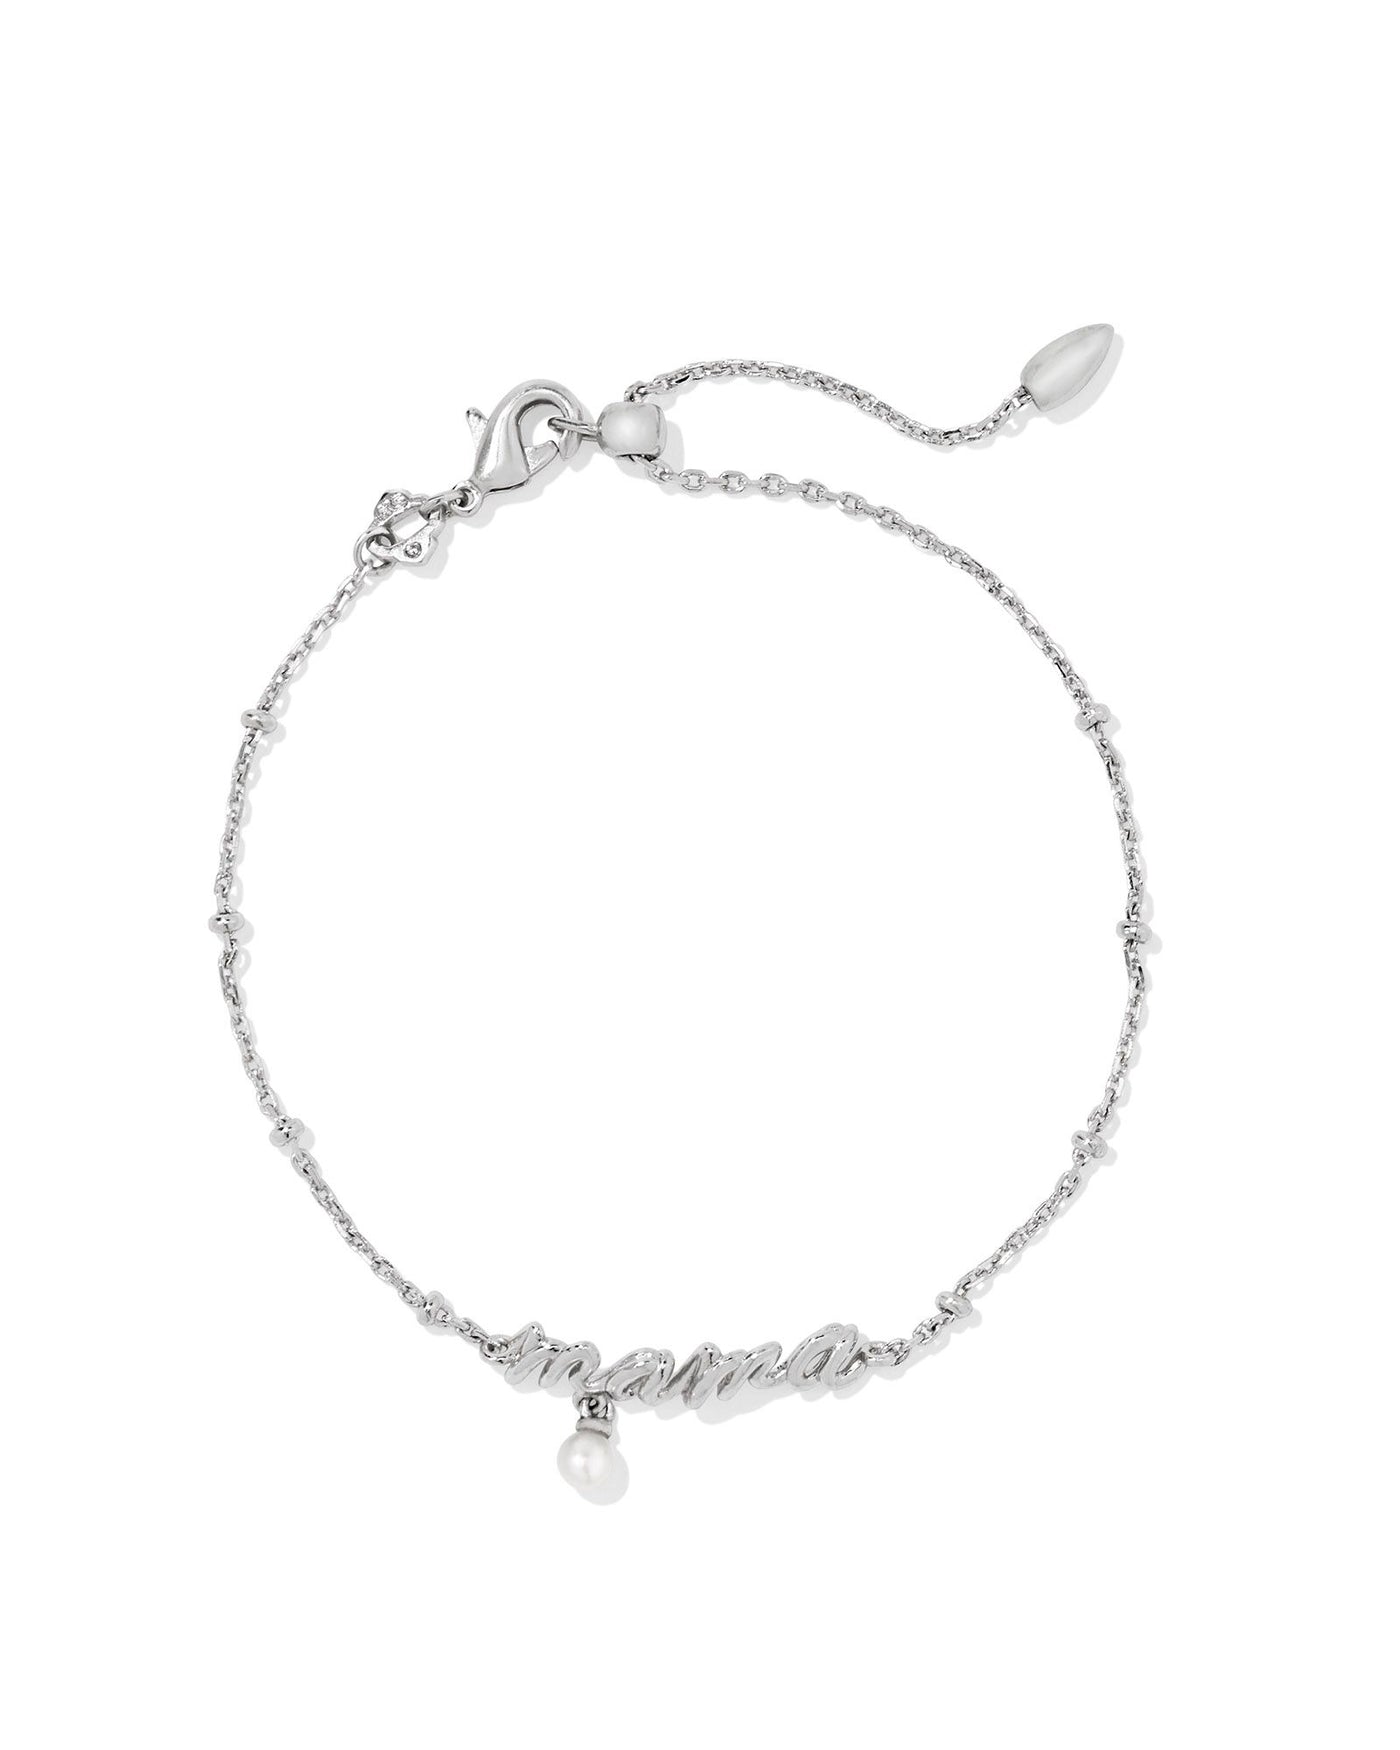 Kendra Scott Mama Script Delicate Chain Bracelet-Bracelets-Kendra Scott-Market Street Nest, Fashionable Clothing, Shoes and Home Décor Located in Mabank, TX